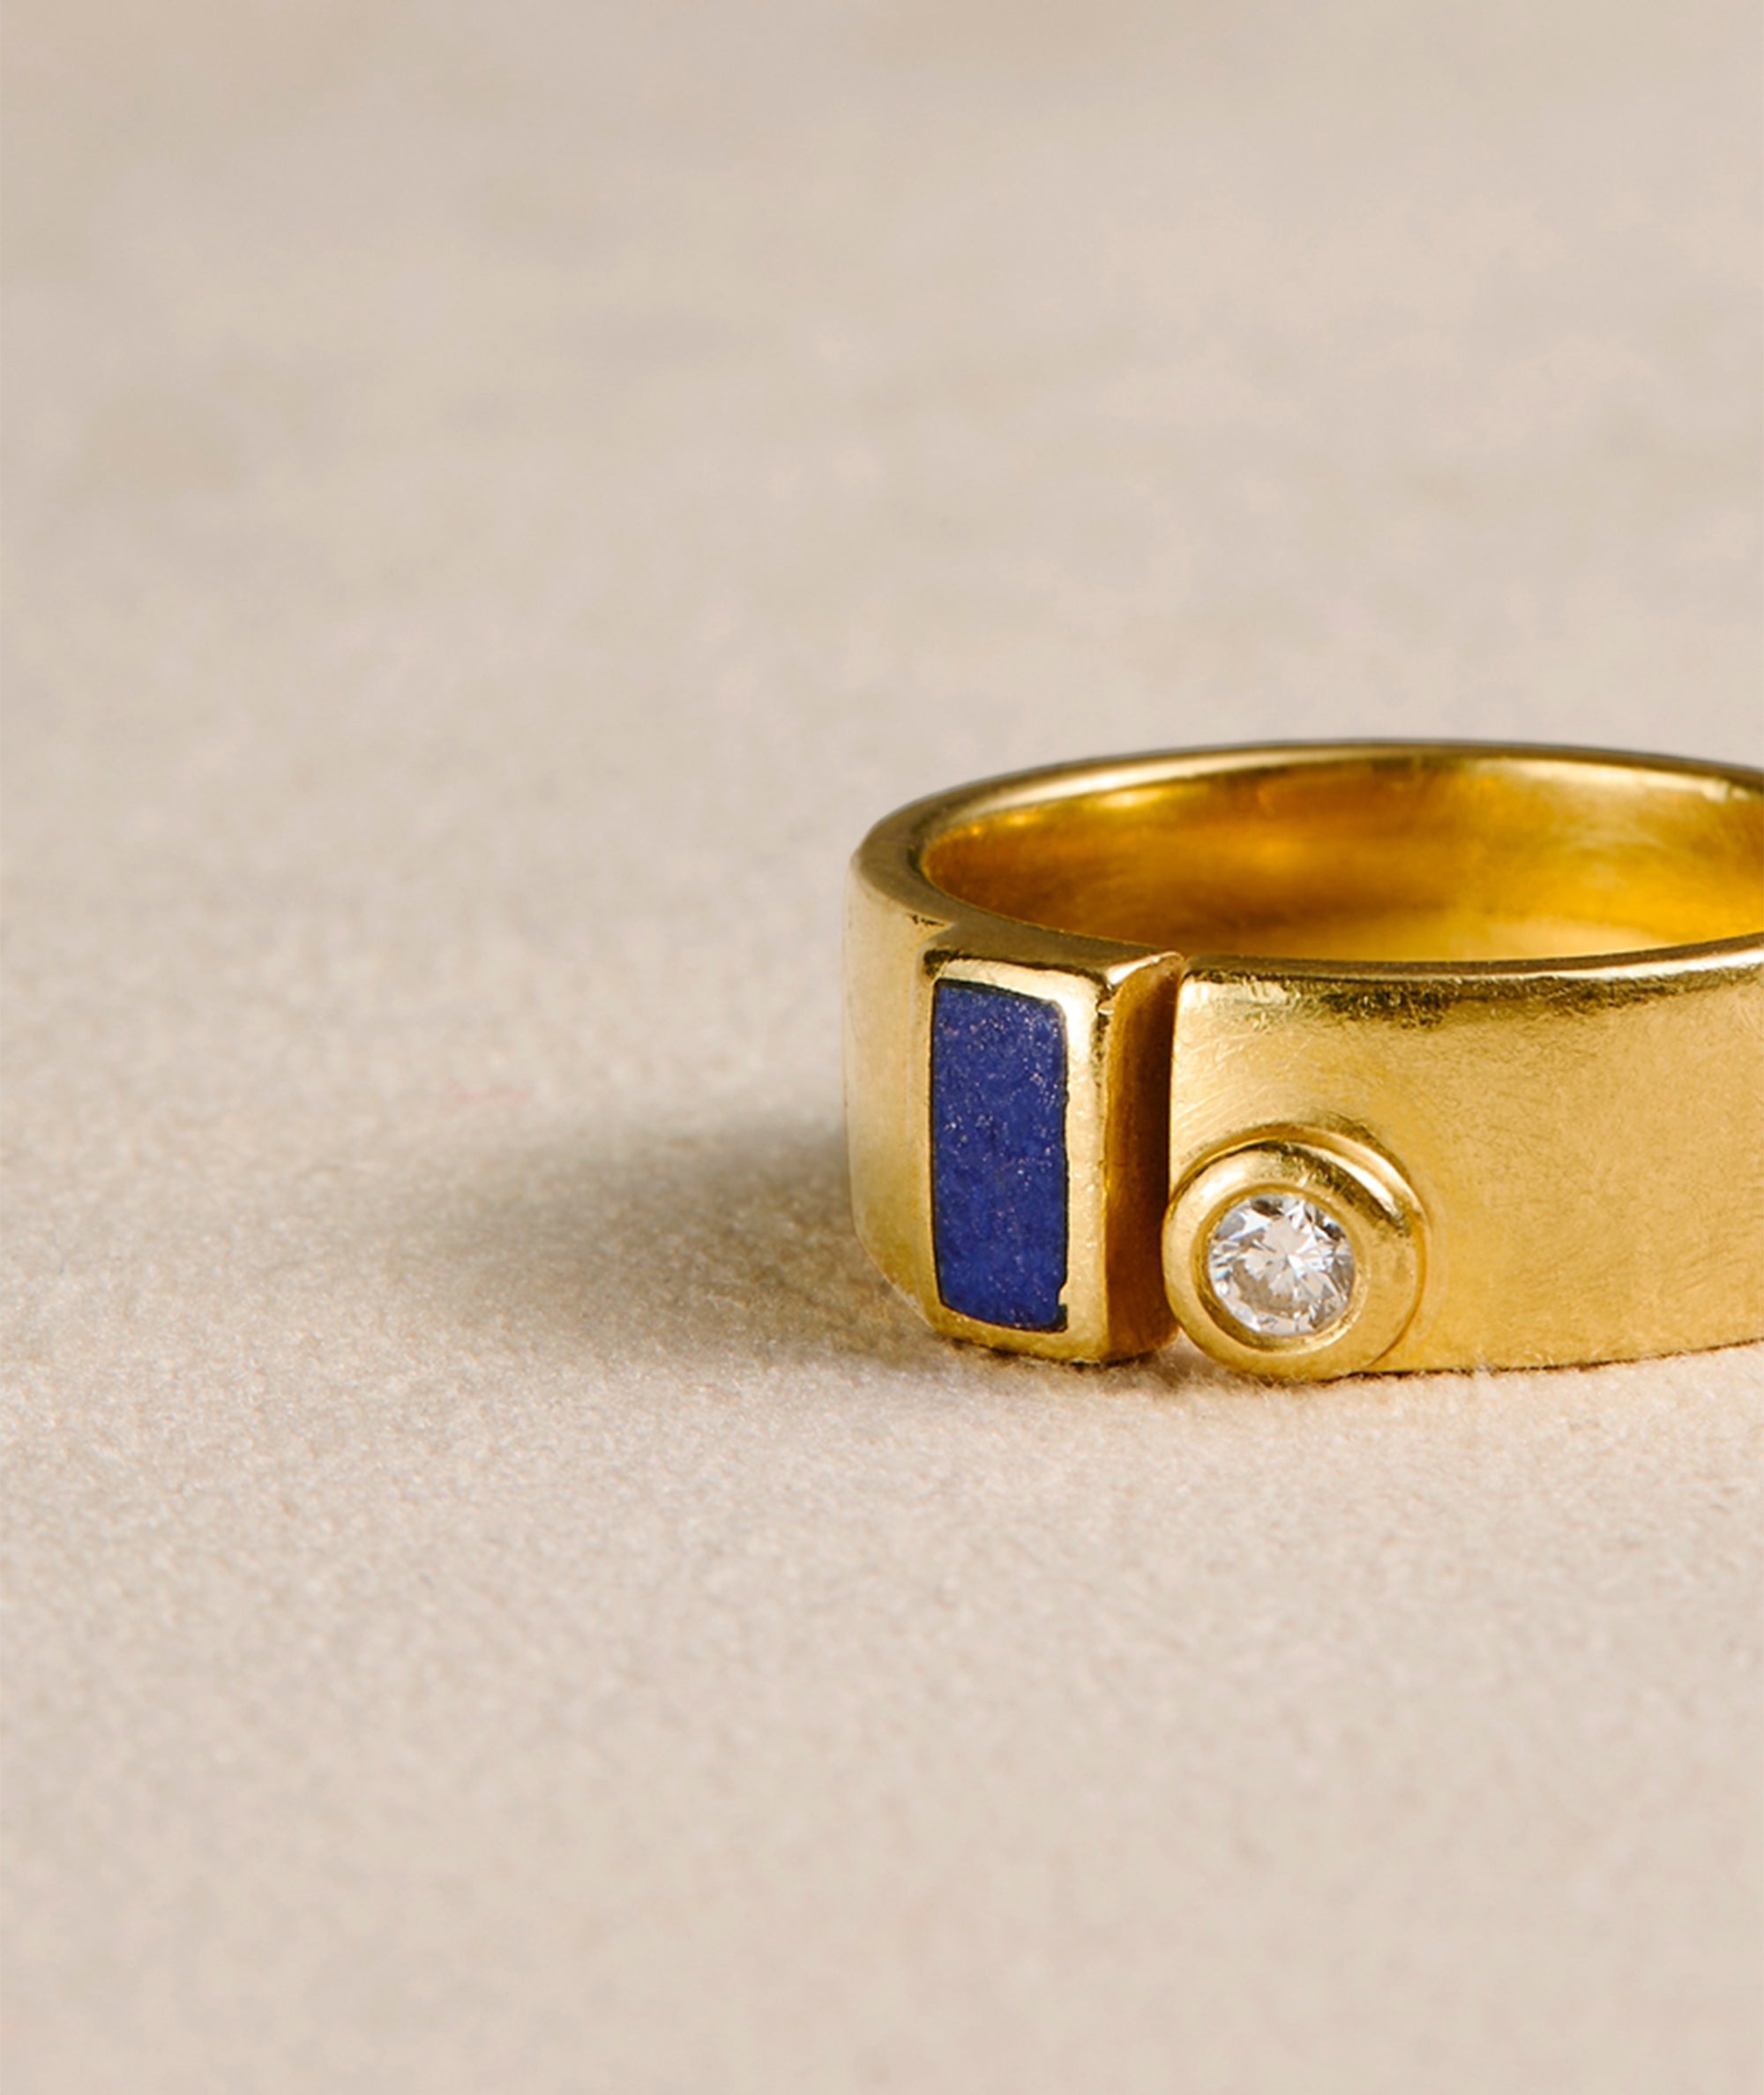 Vintage ring in yellow gold with diamond. Exclusively sourced for EREDE Curated.